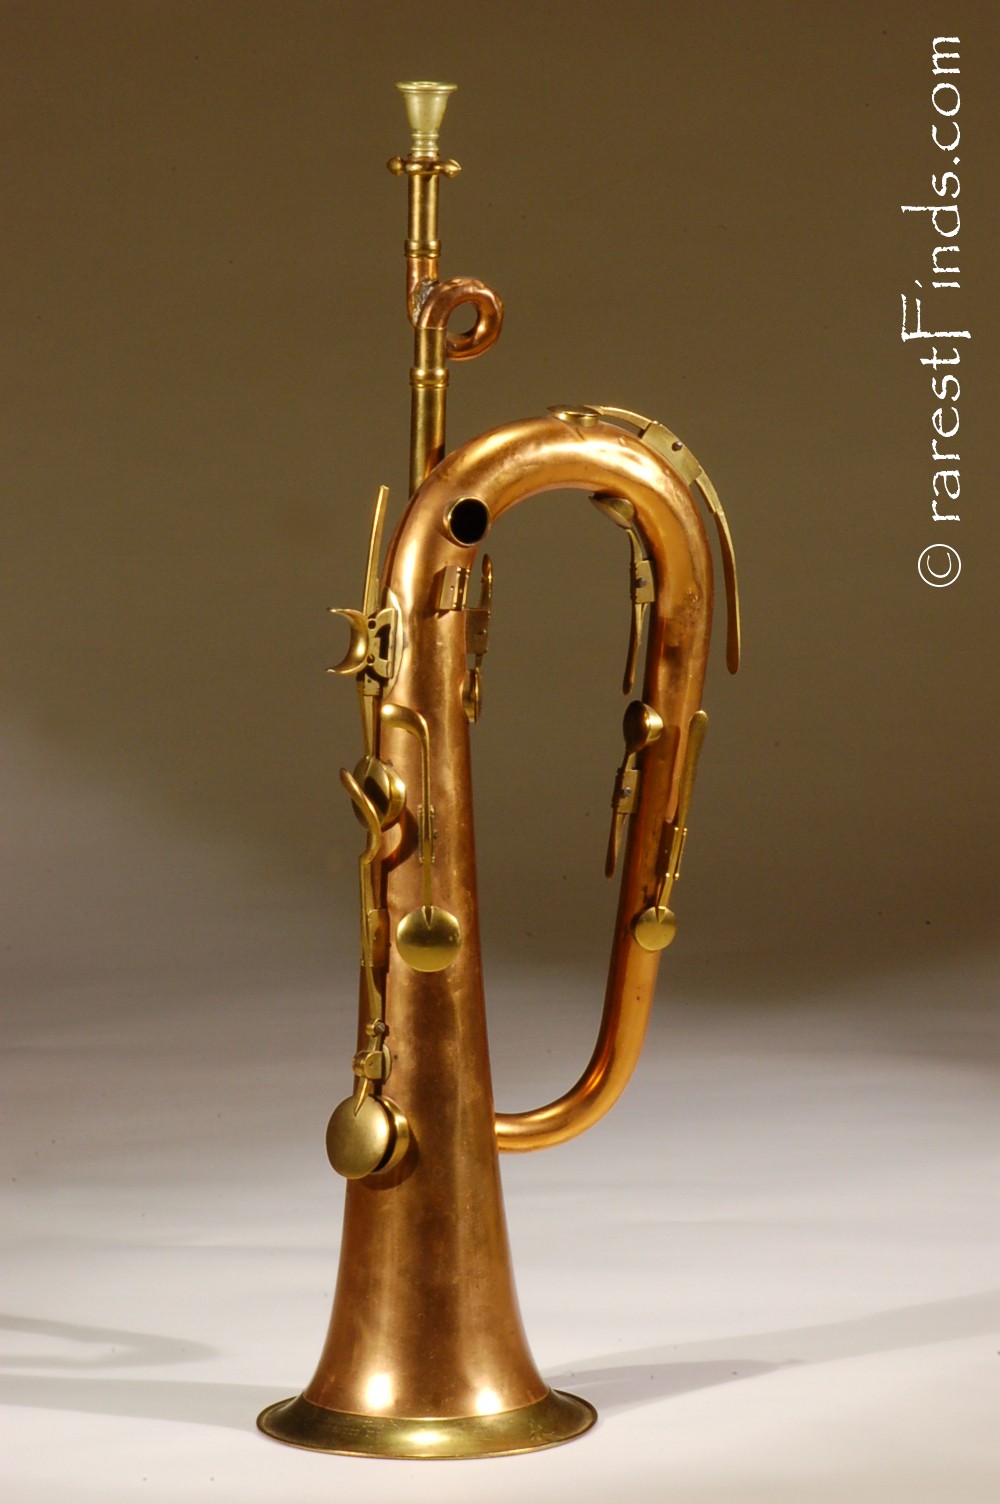 Random Interesting Facts About Brass Instruments - OSMD